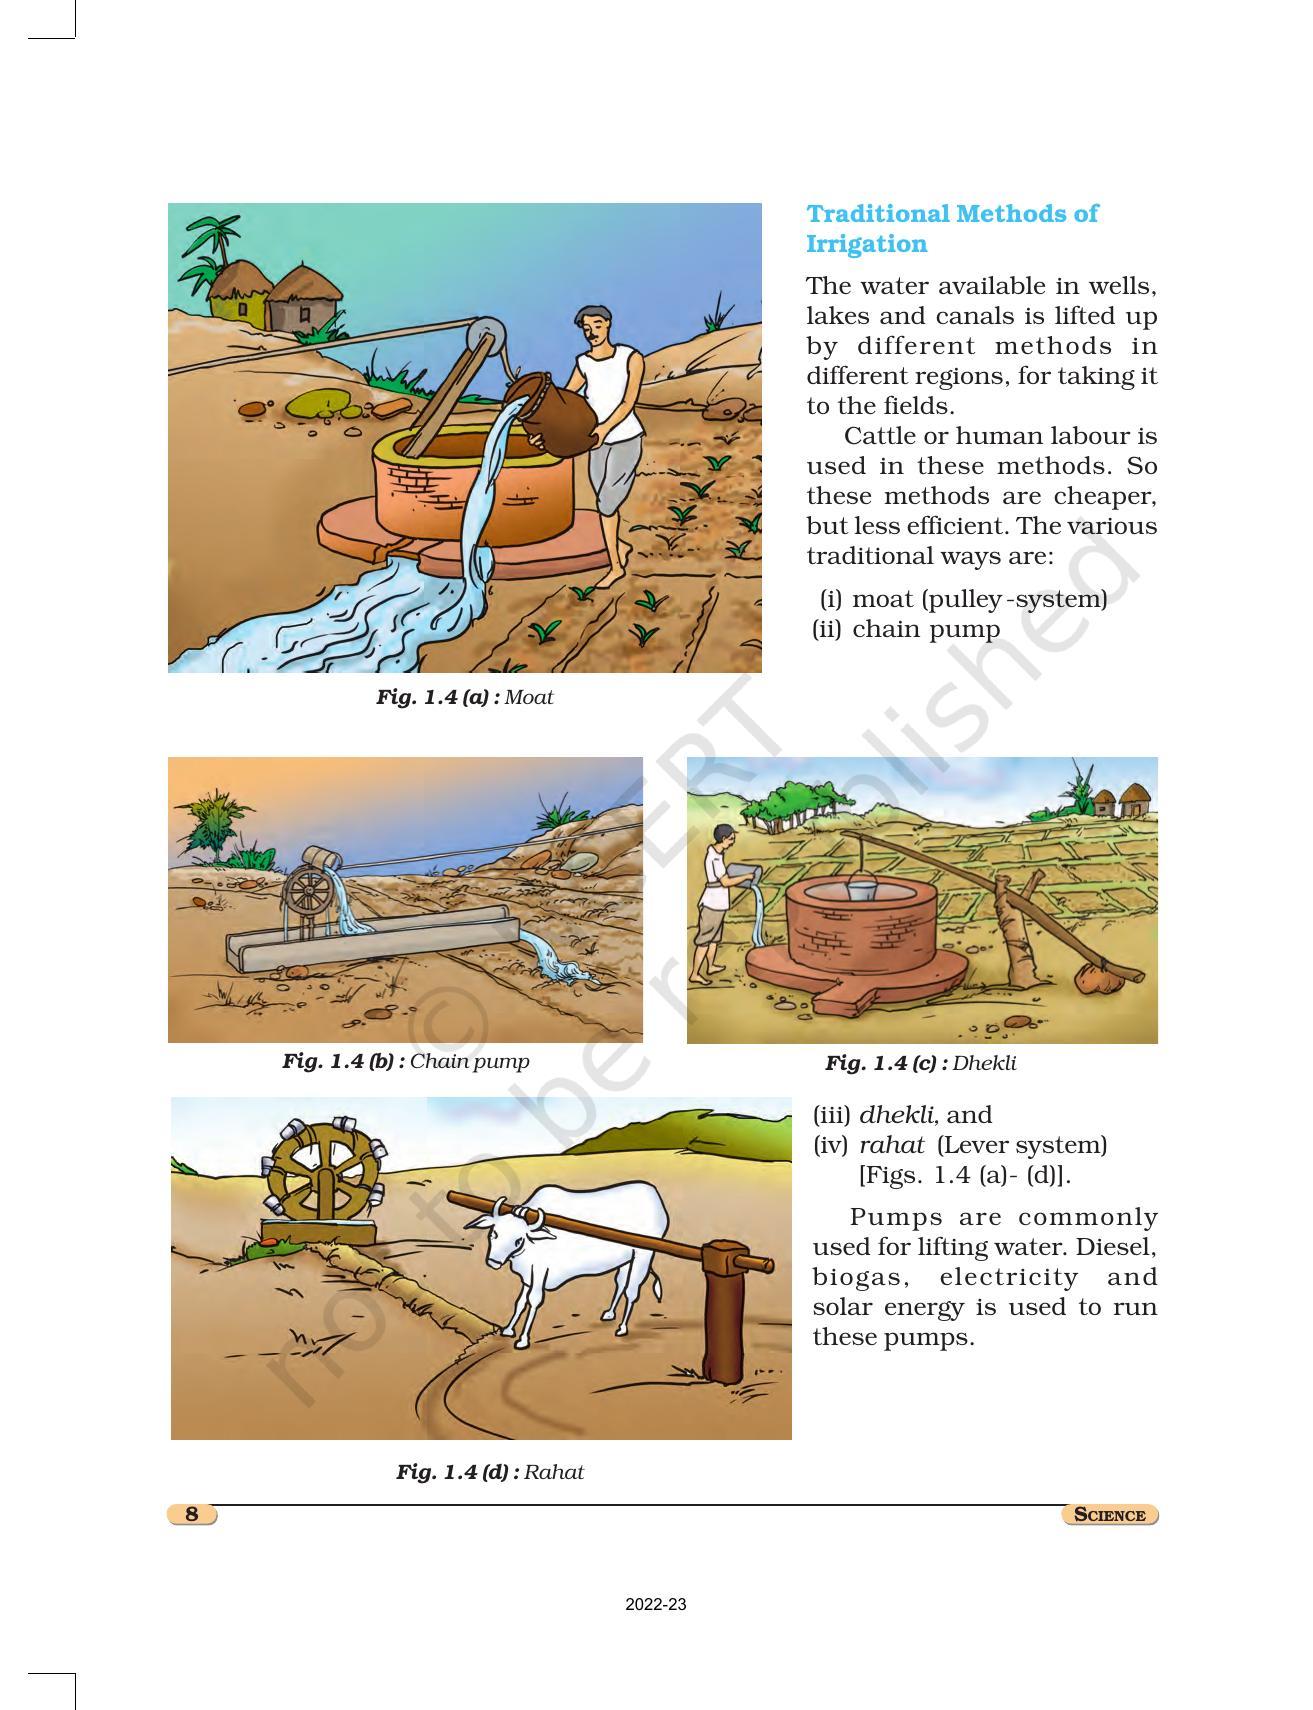 NCERT Book for Class 8 Science Chapter 1 Crop Production and Management - Page 8